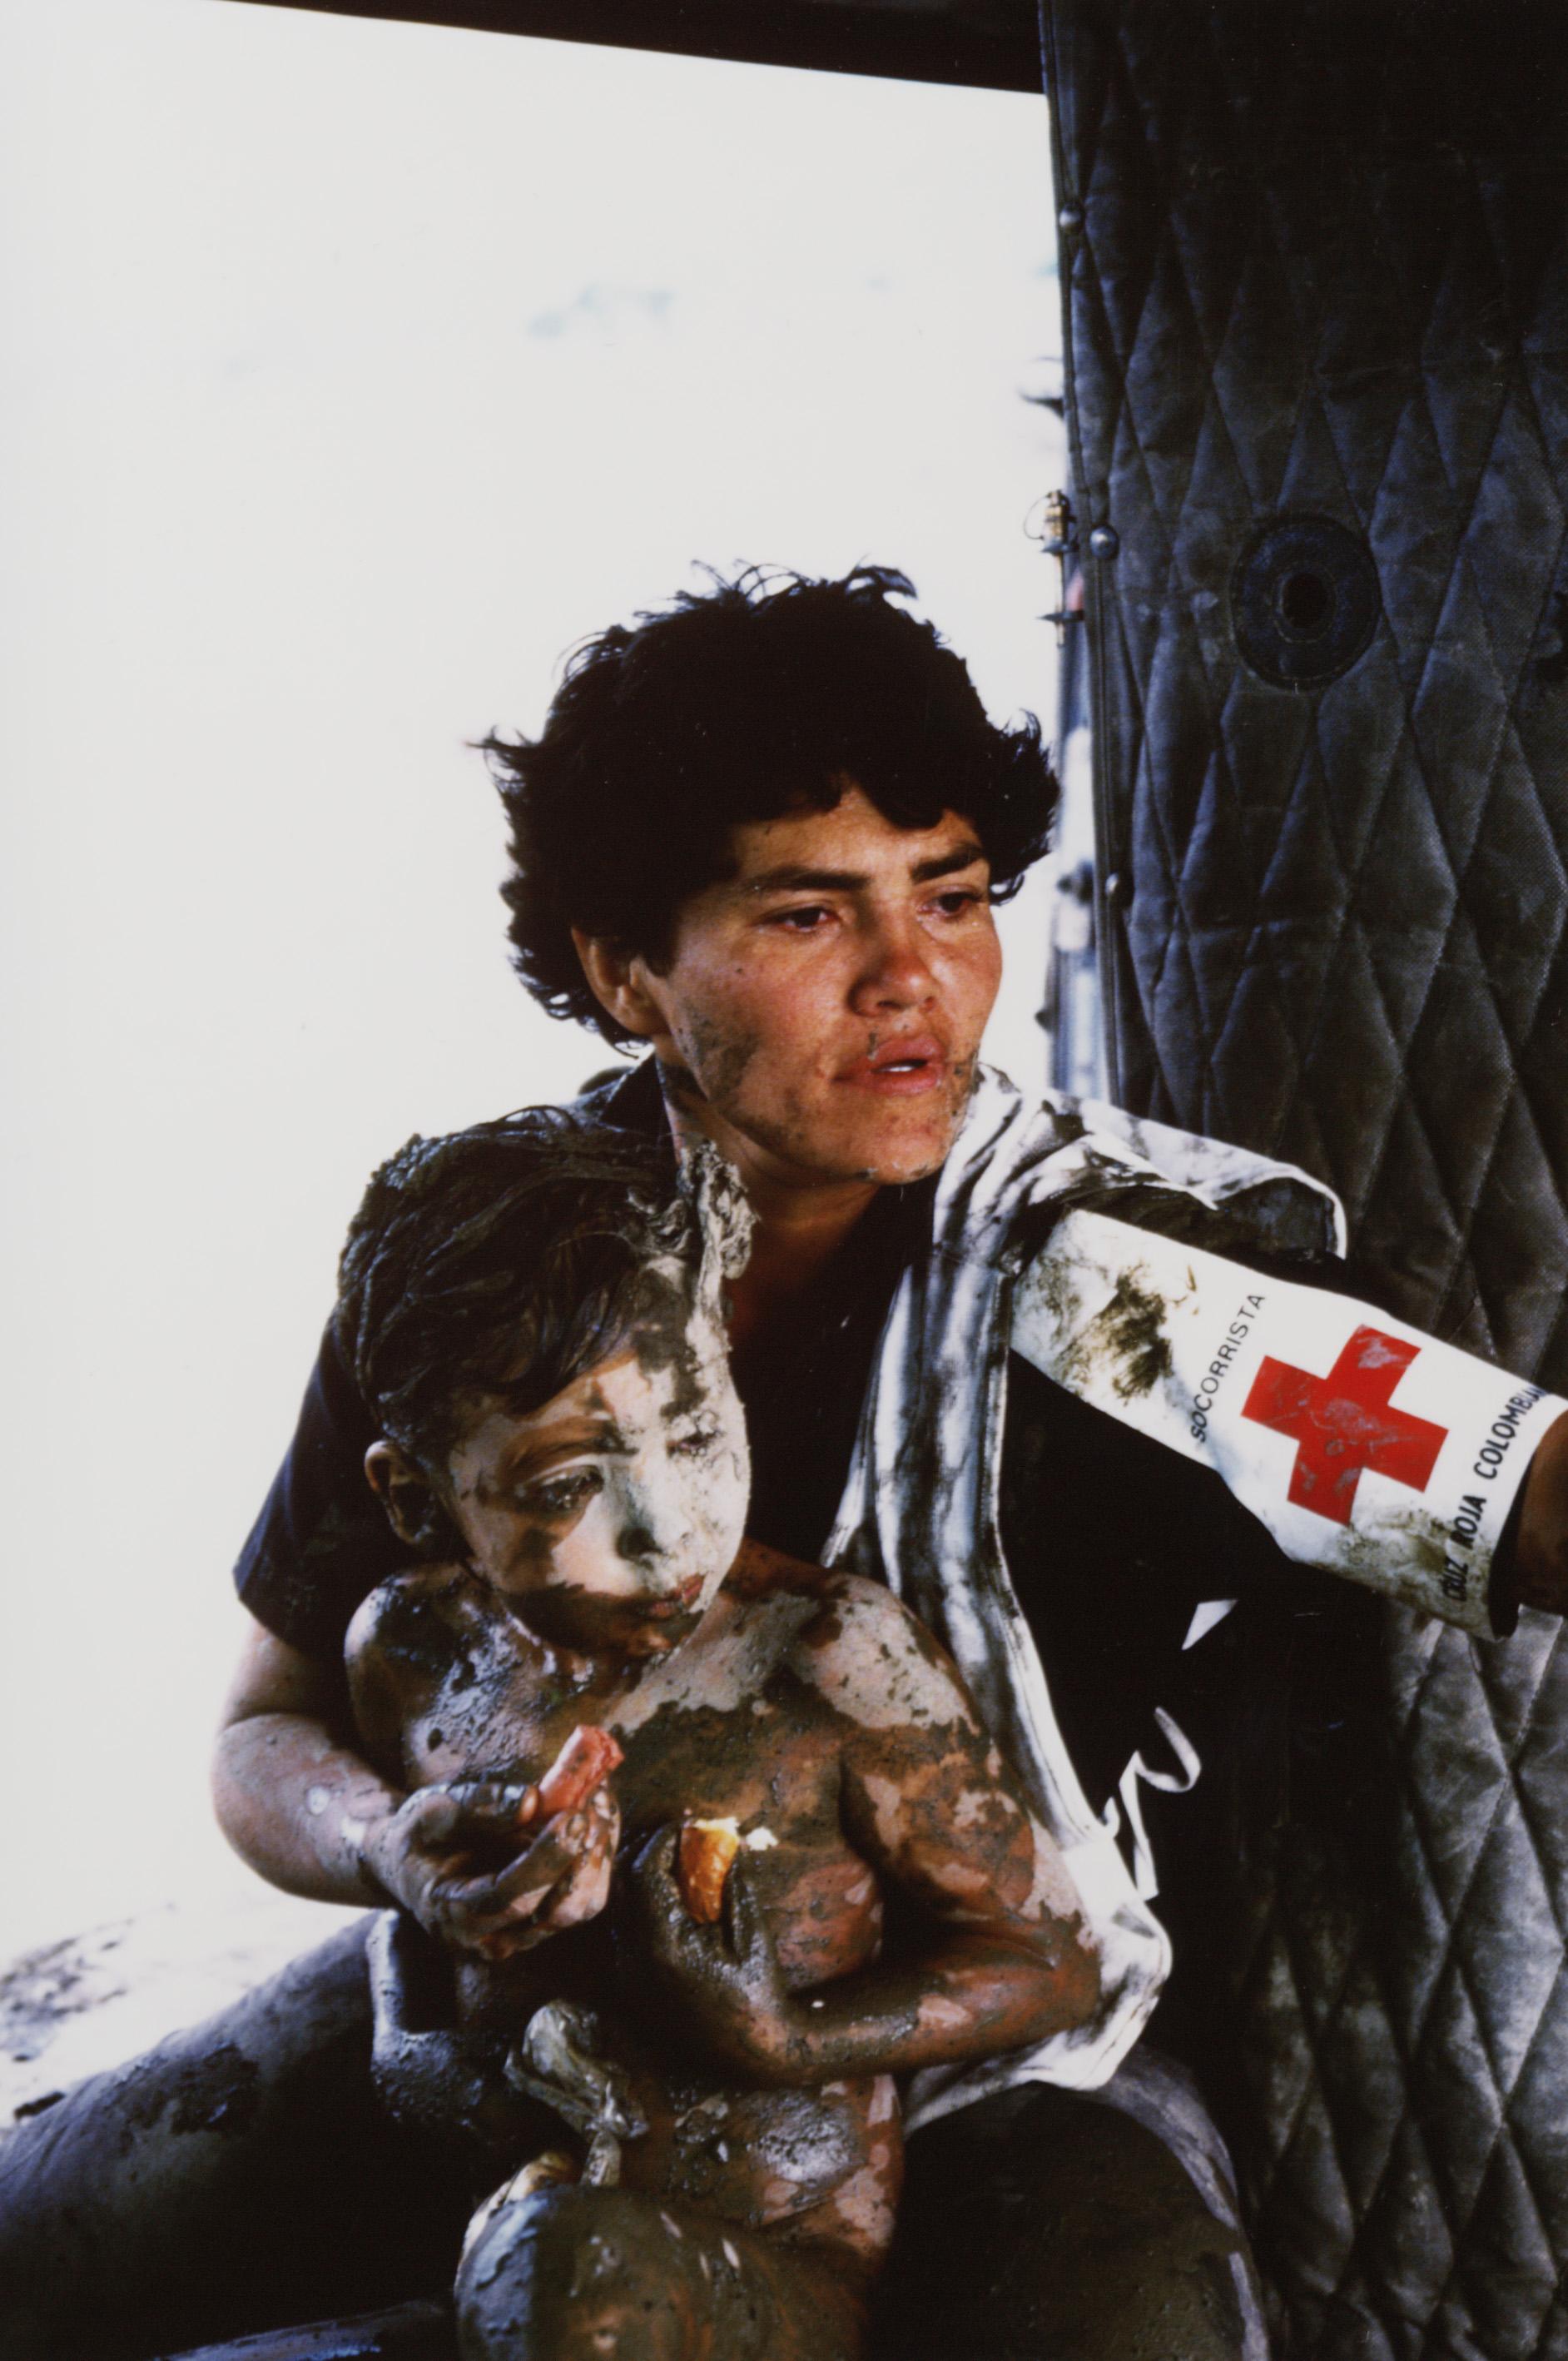 This is Guillermo Cardoza. He was caught in the terrible aftermath of the eruption of the volcano Nevado del Ruiz in Tolima, Colombia in 1985. He was 8 years old. He was found naked, stuck in the lahar trying to seek safety. It had been 58 hours since the natural disaster hit, and finding him alive was surprising, especially in the thick lahar he was in. His entire family was killed. Almost every village near the volcano was wiped out. What's worse is scientists tracking the active volcano warned the Colombian government 2 months before it erupted that it was likely to erupt soon, and the government did absolutely nothing. The towns close to the volcano never saw it coming and had little to no chance to escape. What killed most people were lahars, which are volcanic induced mudslides that wiped out the towns. It was estimated 29,000 people lived in the towns directly hit by the mudslides. 22,000 of them died. The most famous being Amayra Sanchez Armero. You may have seen the well known picture of her trapped under water with black eyes and wrinkled fingers, staring at the camera with a sad fearful look.